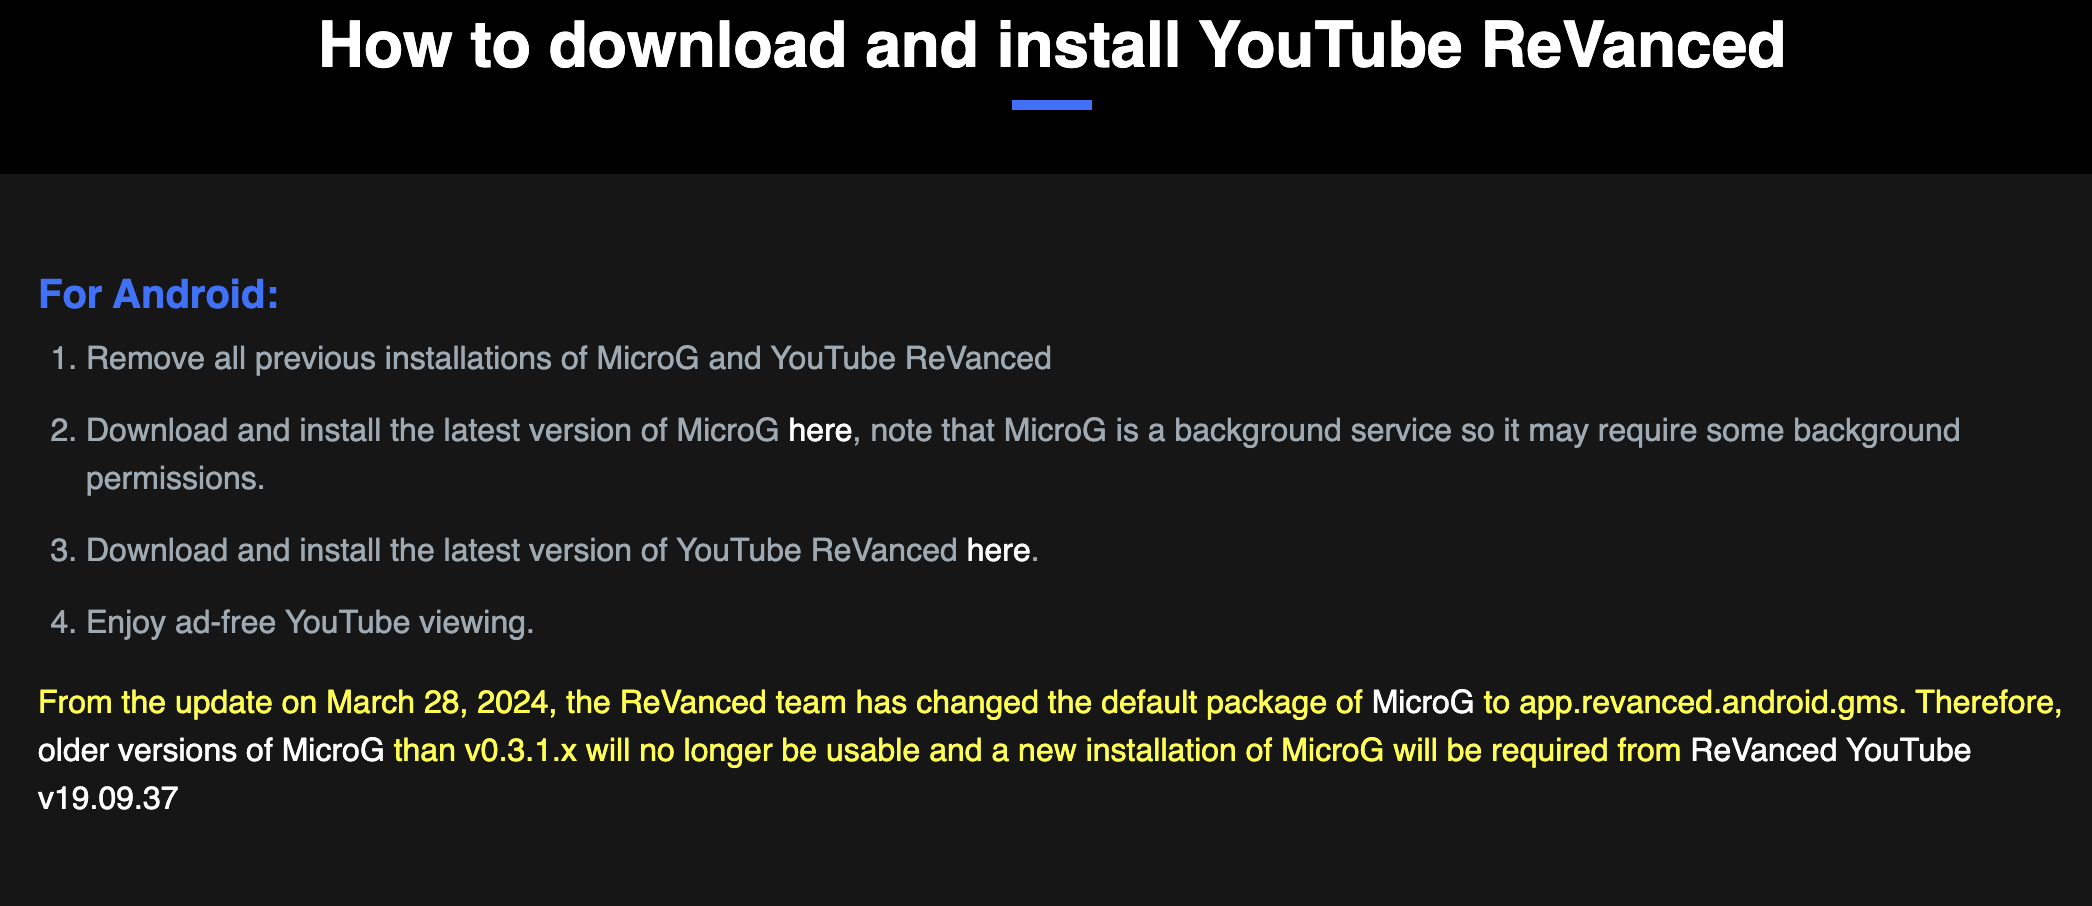 How to Install Youtube Revanced on Androiod App